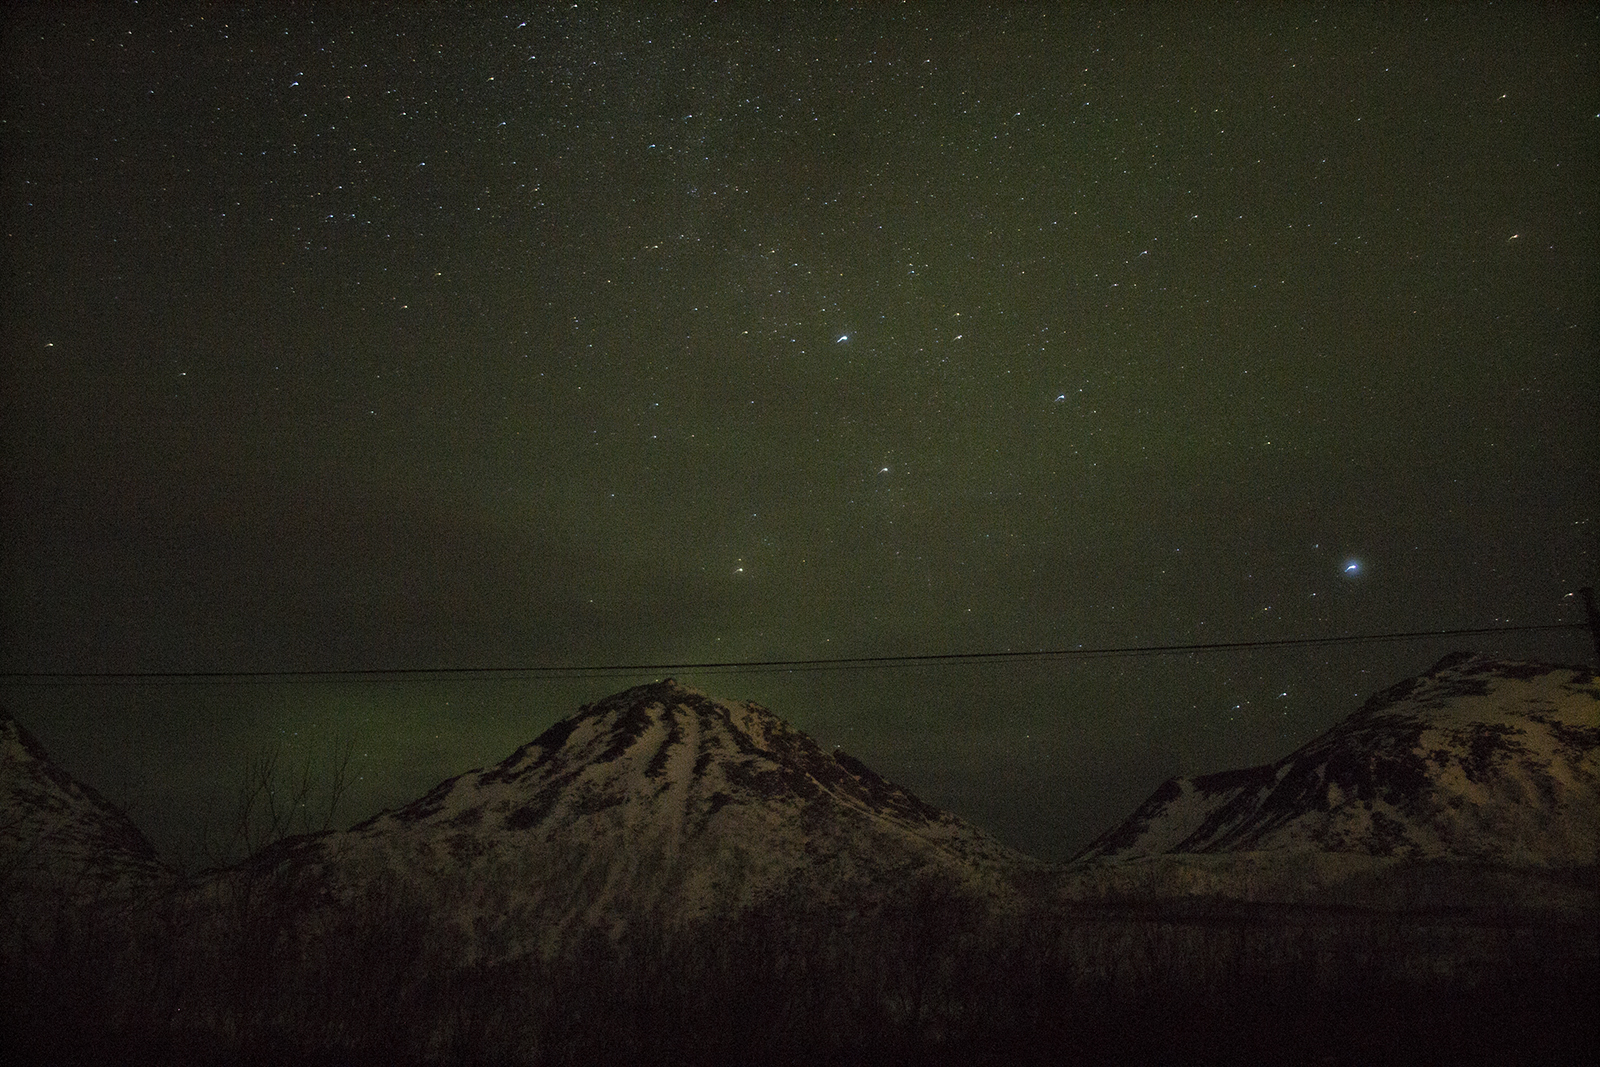 chasing the northern lights in Tromso